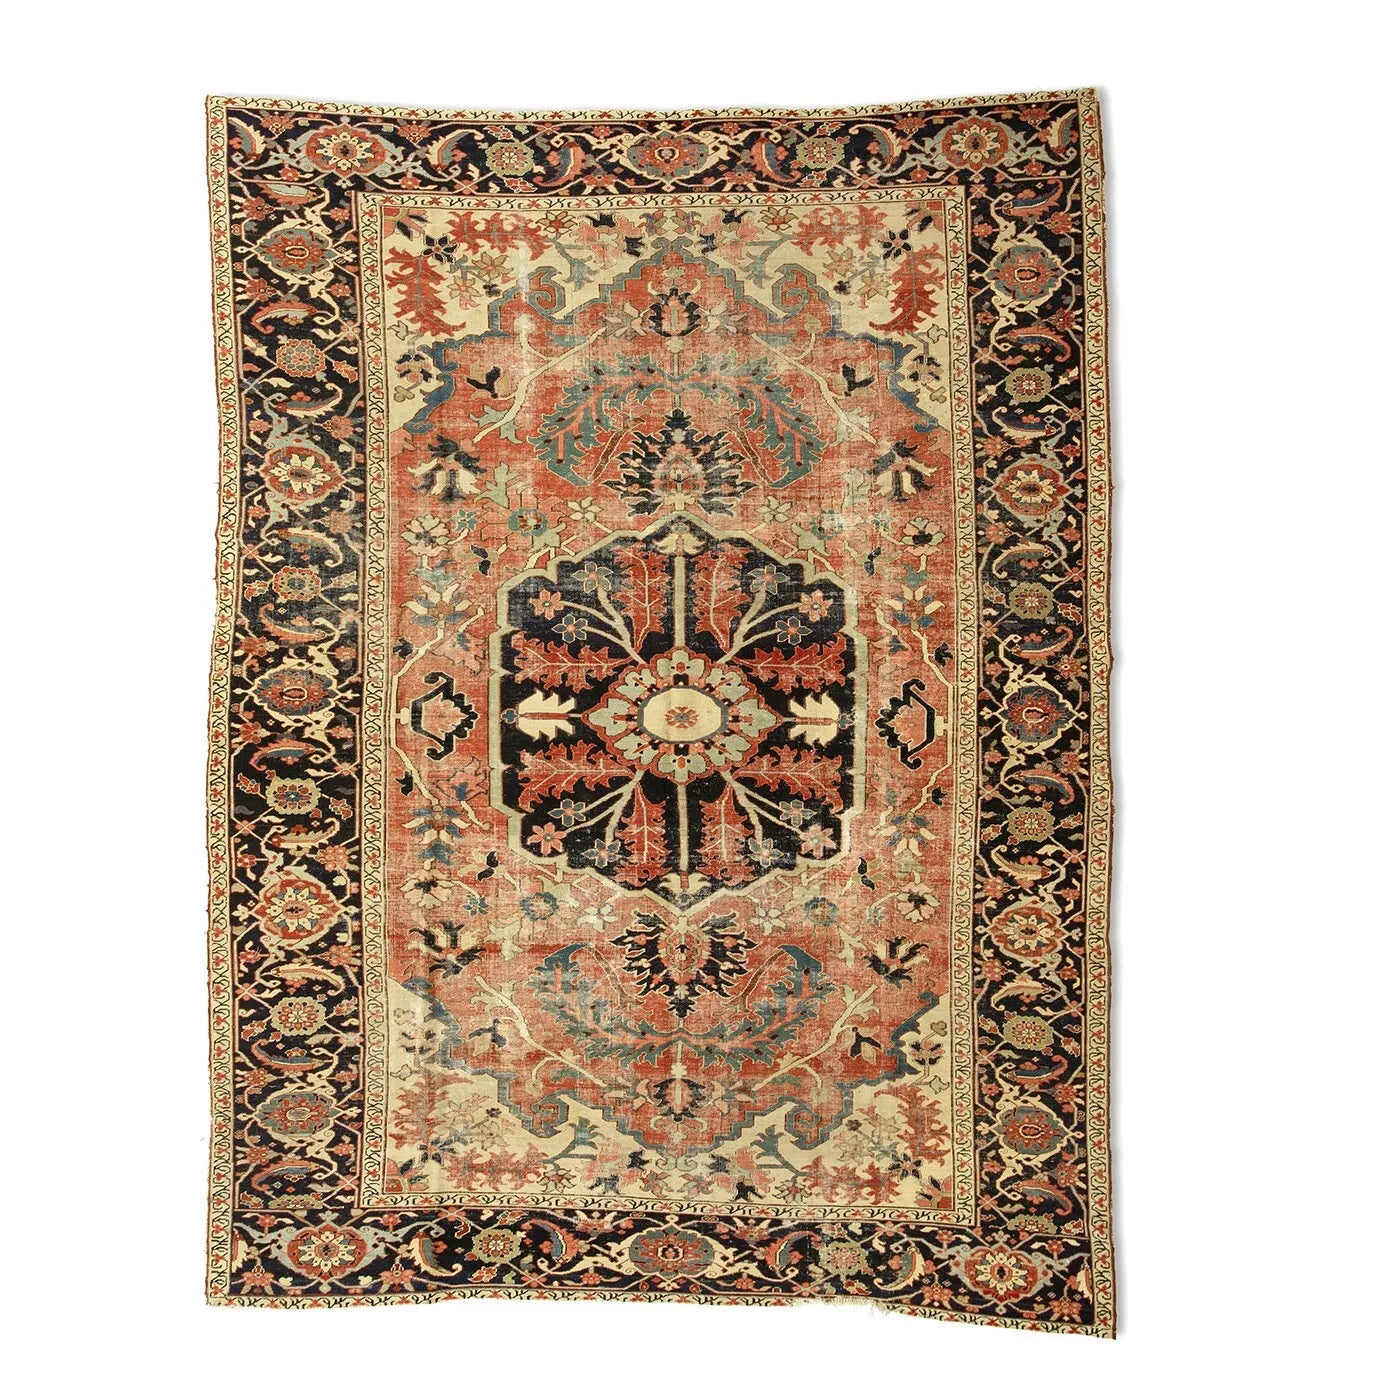 A 19th Cectury Worn Out 9' x14' Genuine  Persian Serapi Rug